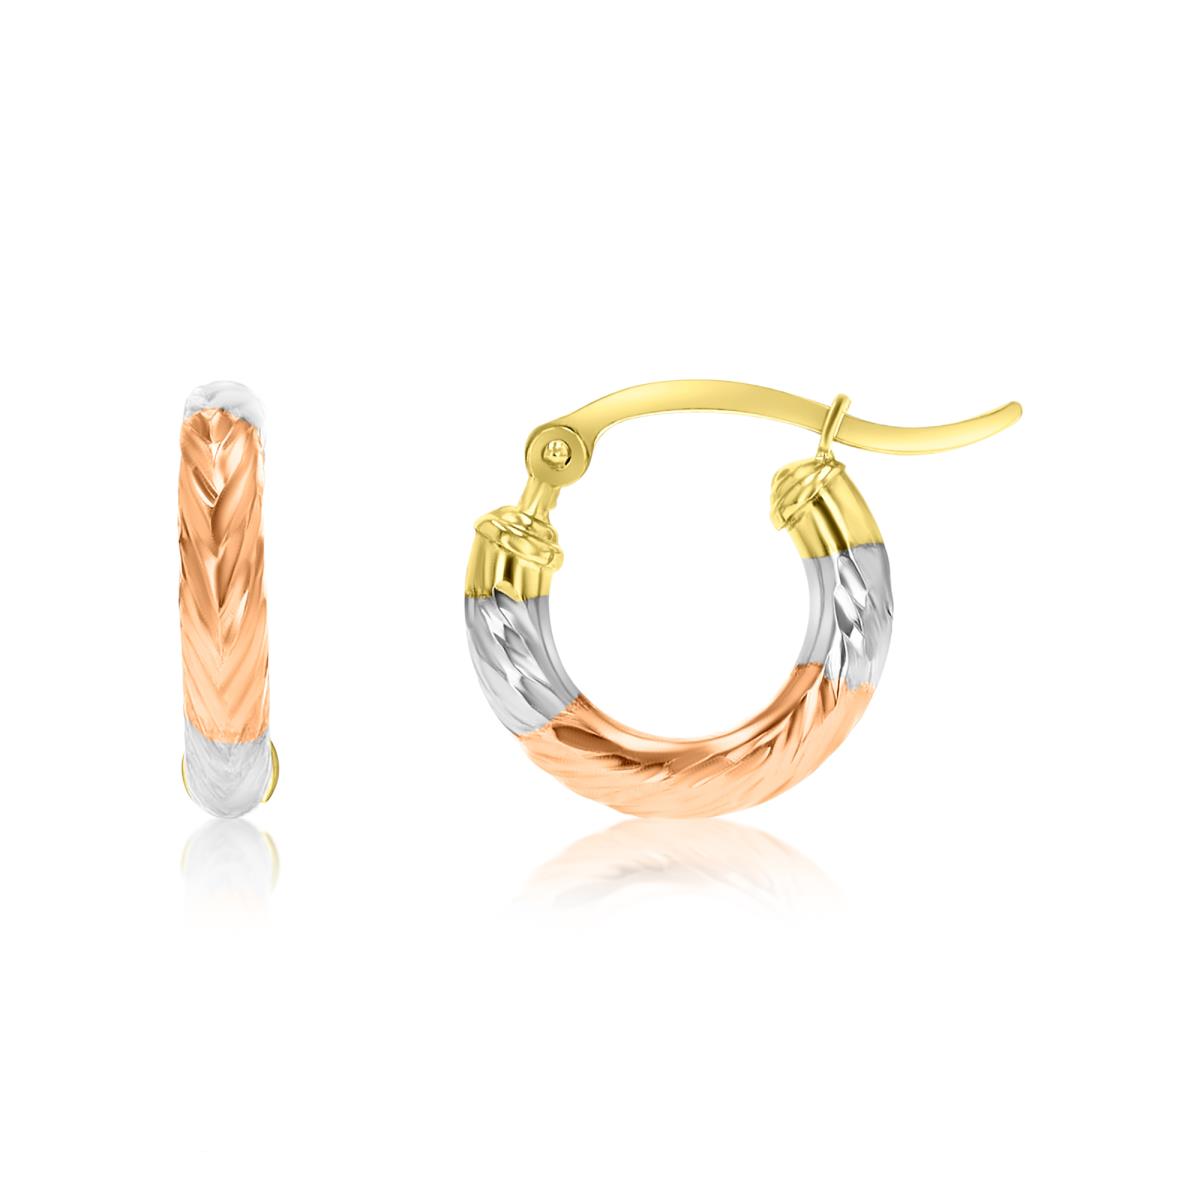 14K Gold Tricolor 3x15mm (0.60") Twisted DC Hoop Earring